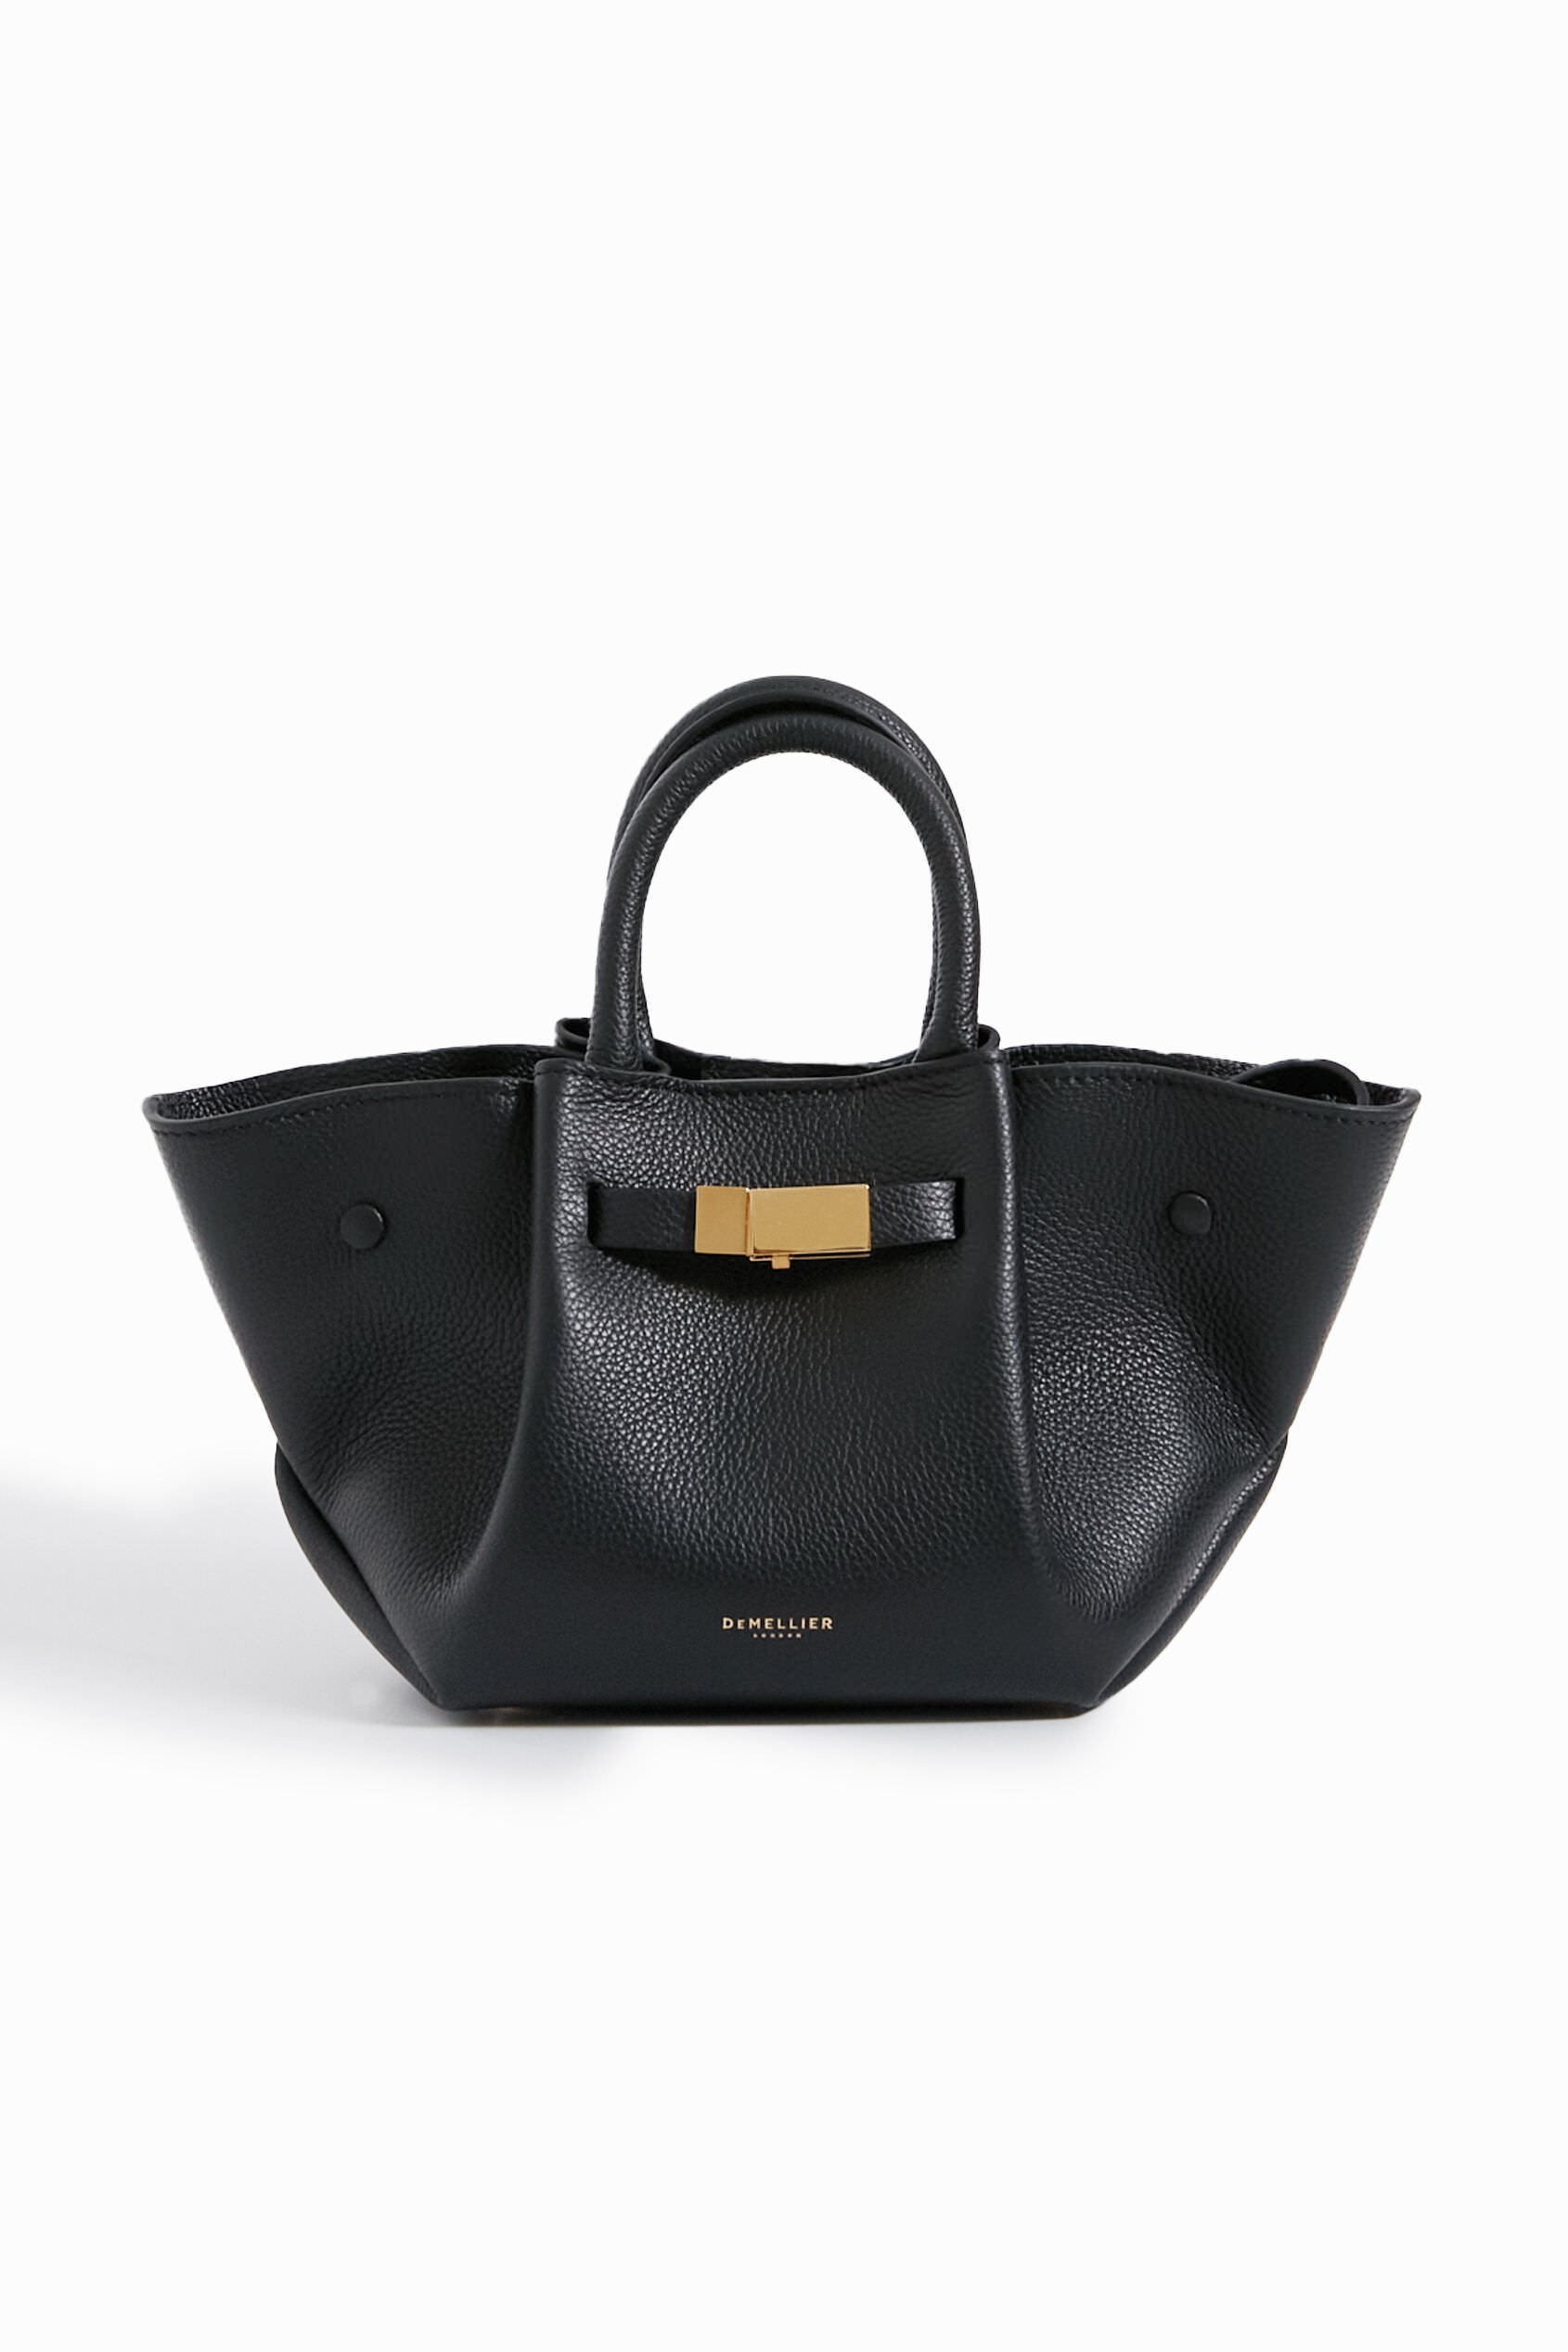 Demellier Leather New York Tote Bag - Black - One Size